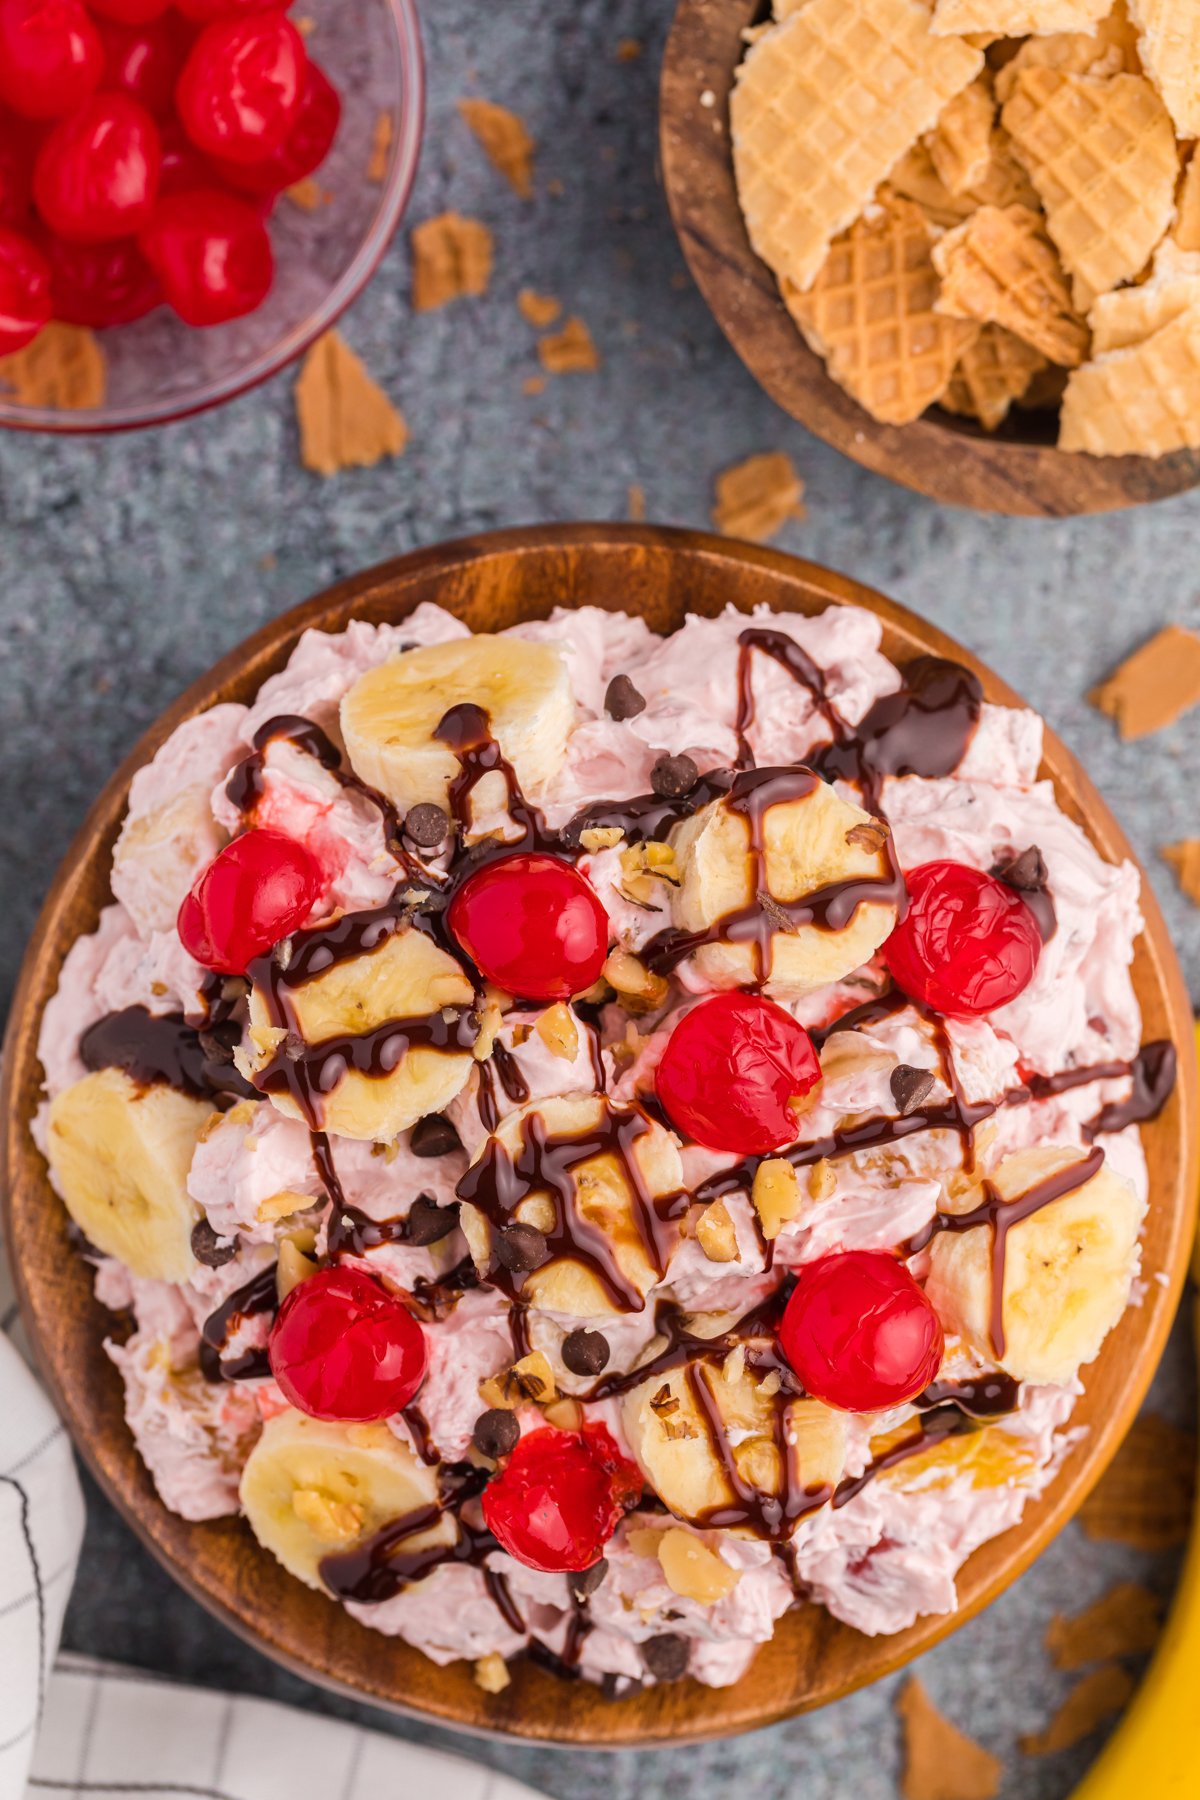 banana split fluff with chocolate syrup on top